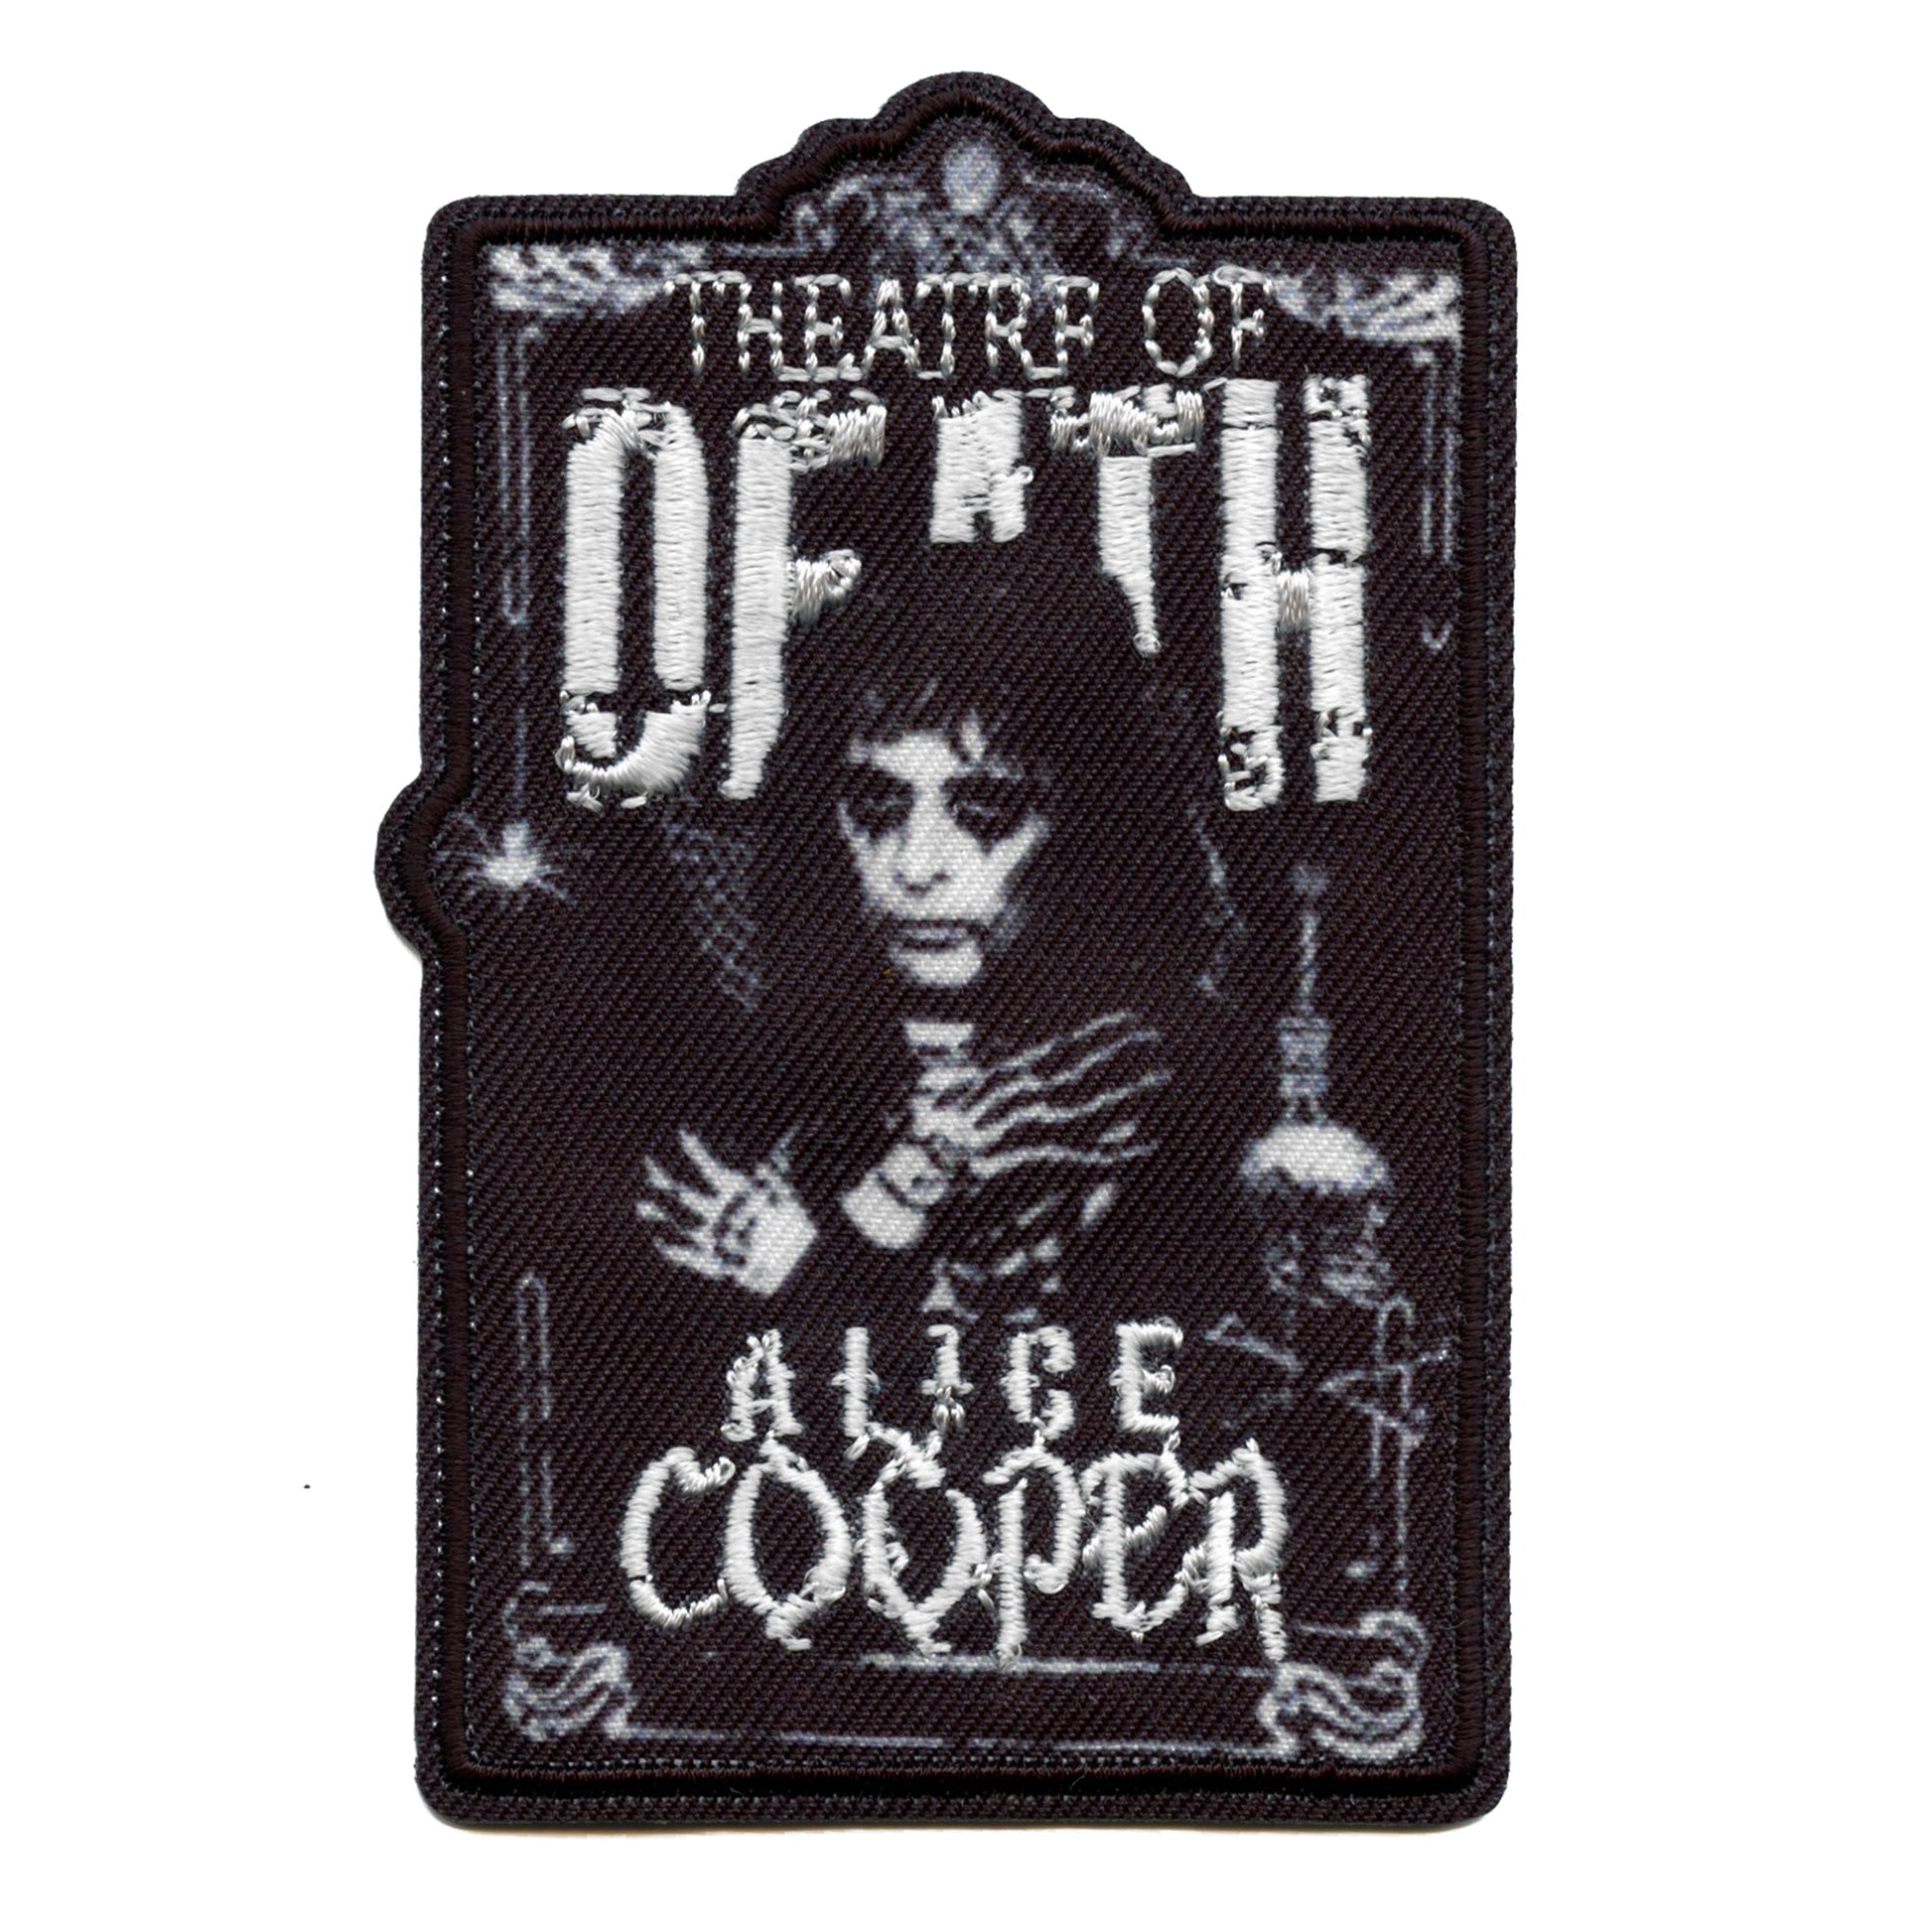 Alice Cooper Theatre Of Death Patch 2010 Live Album Embroidered Iron On 